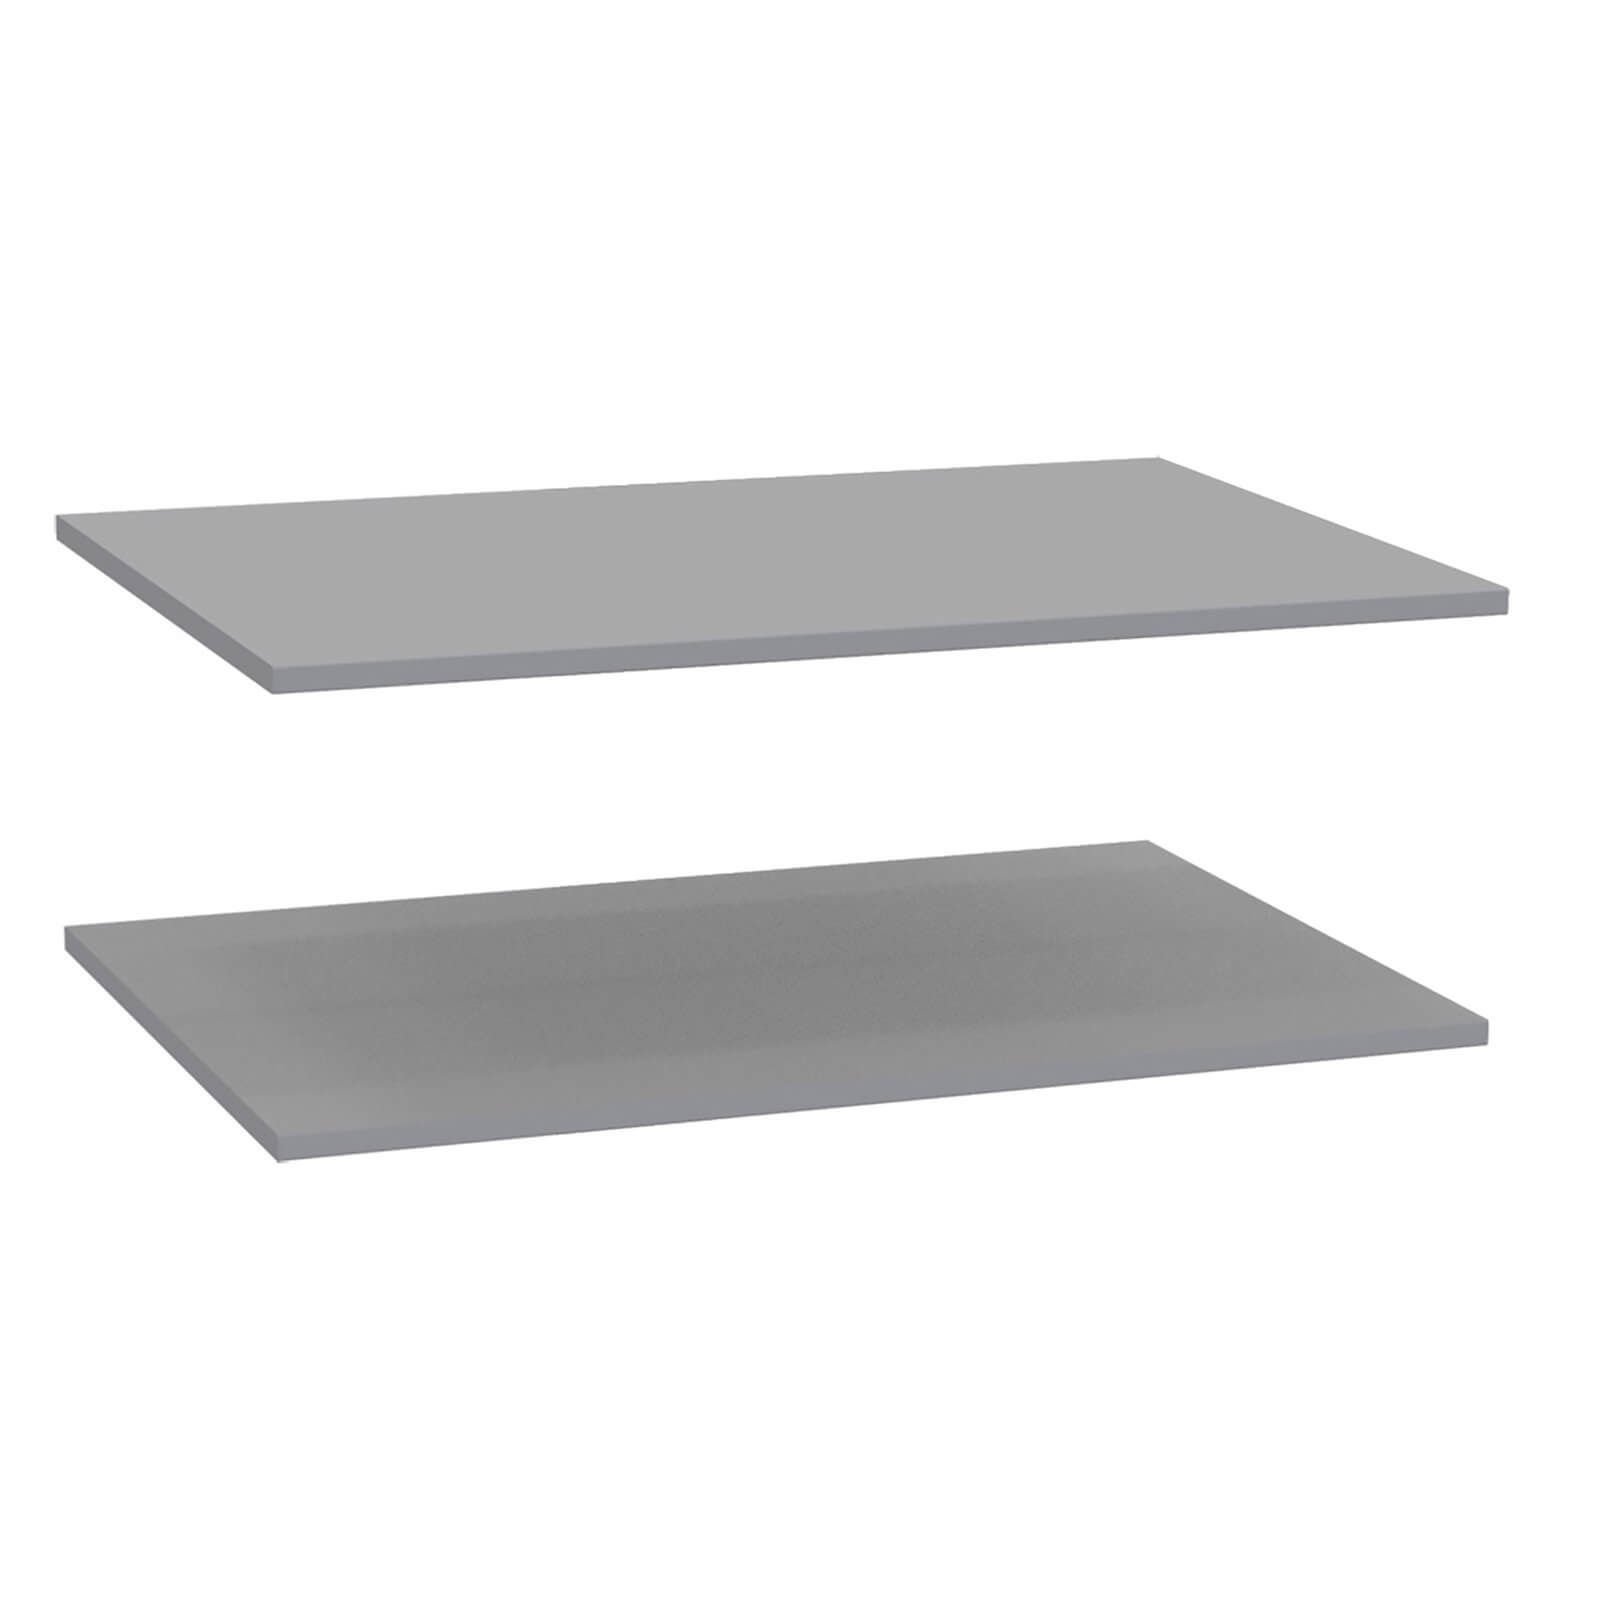 House Beautiful Fitted Bedroom Internal Shelf for Double Wardrobe - Grey x 2